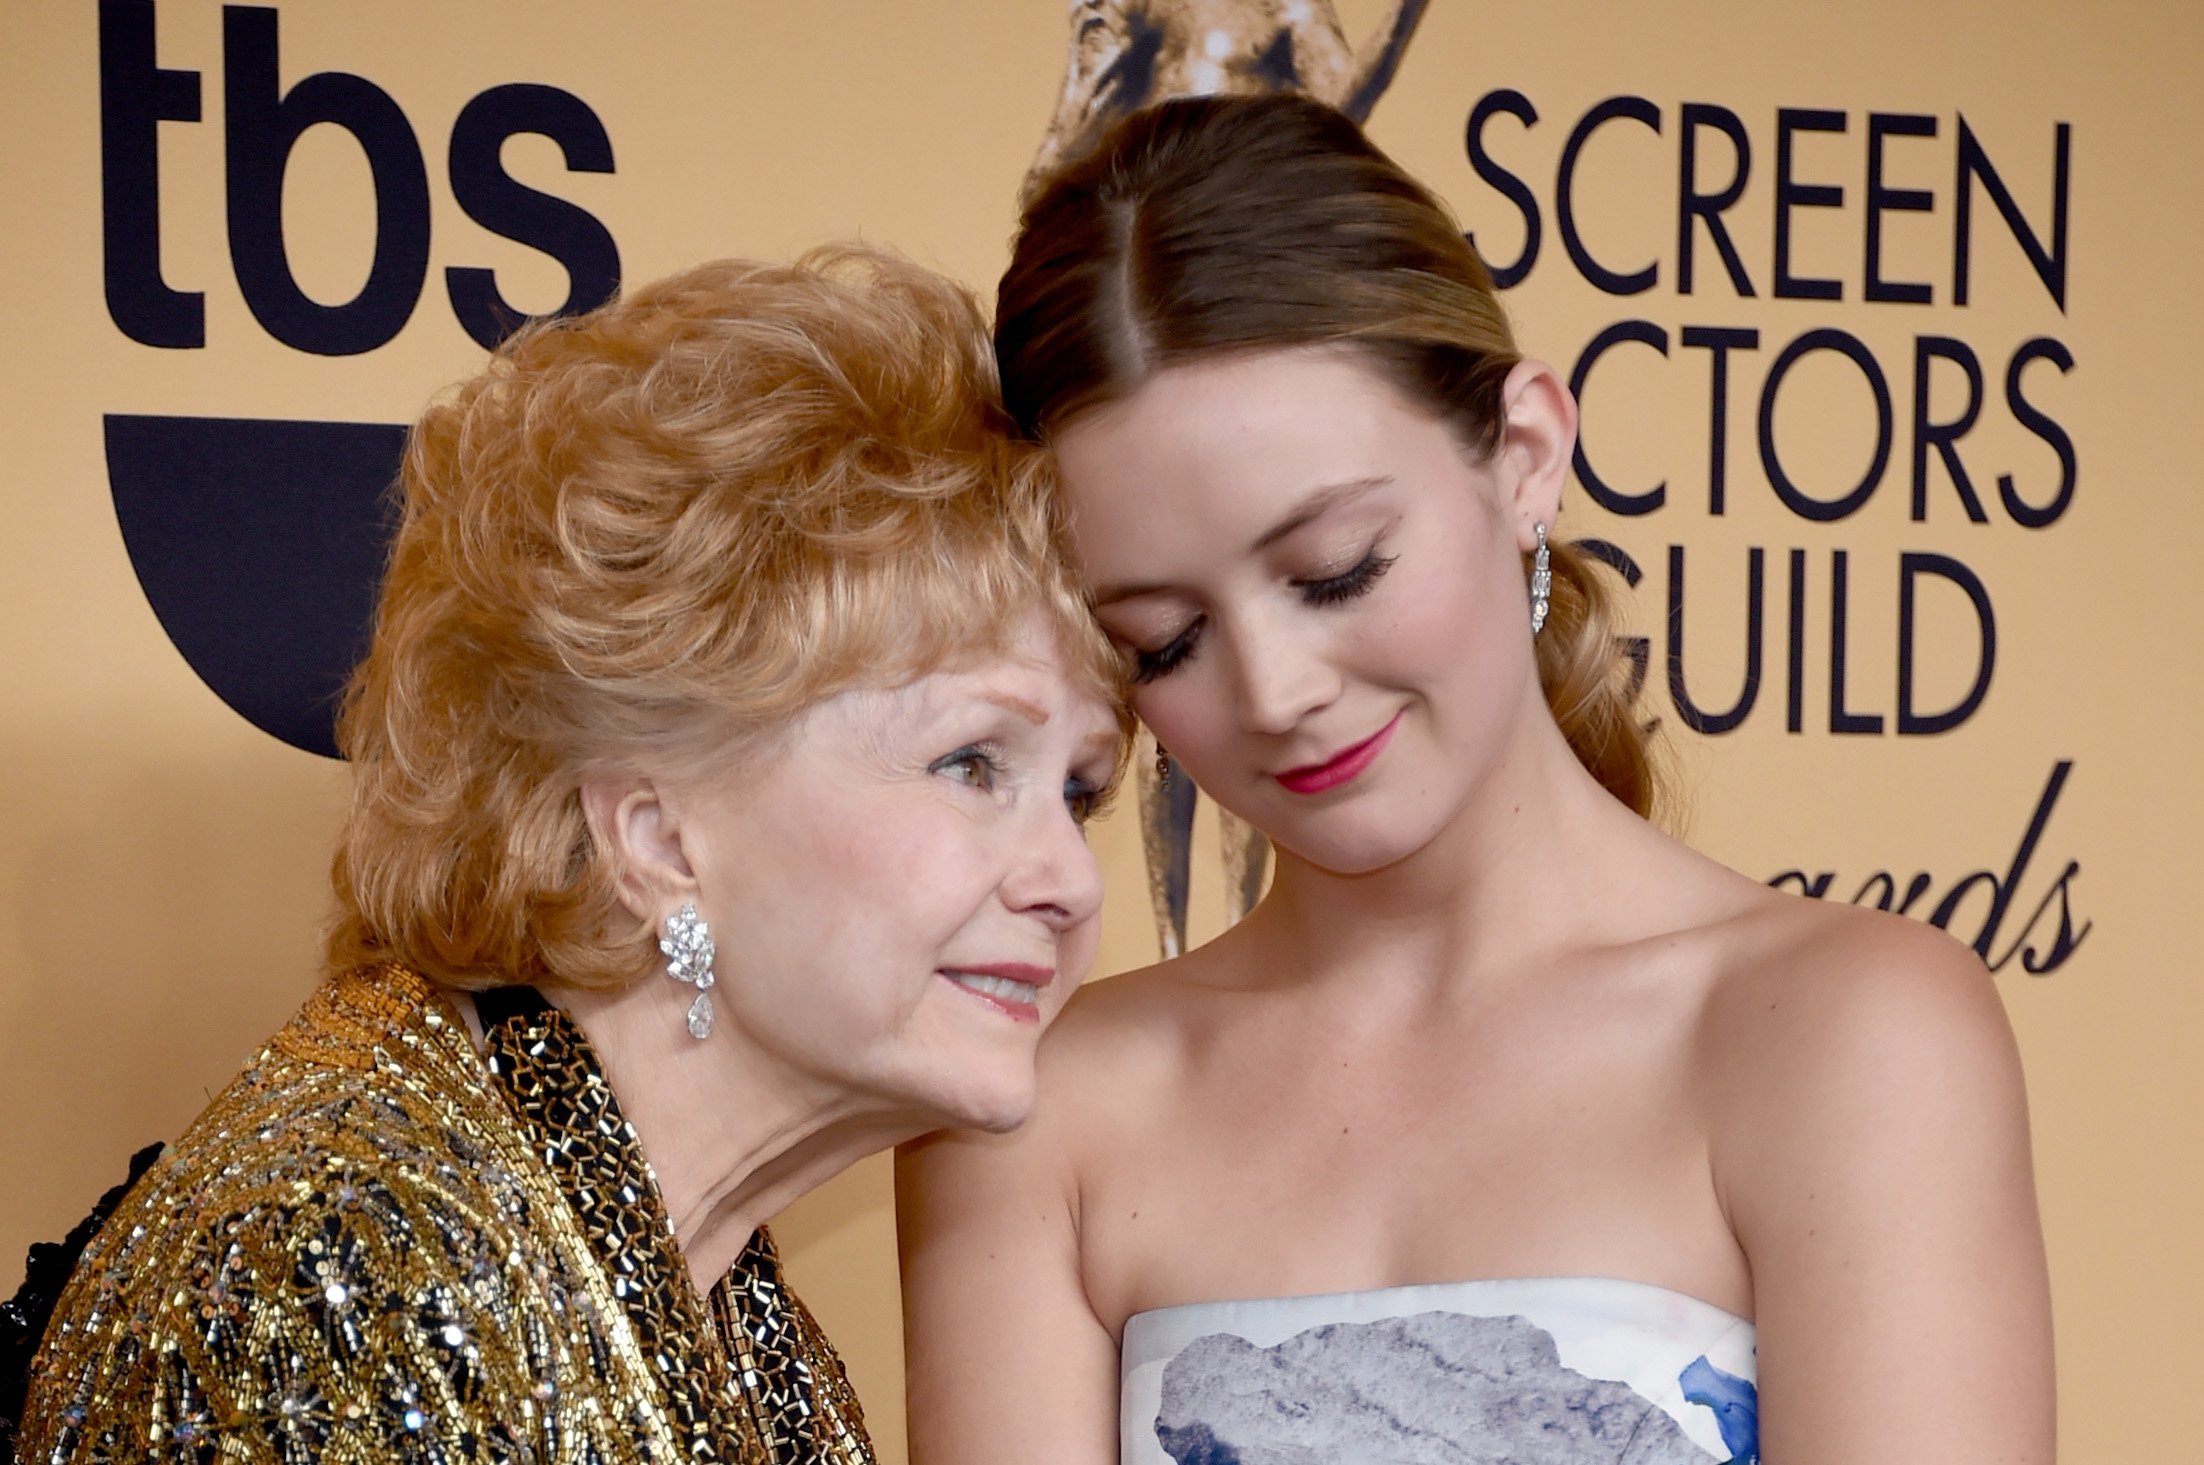 Debbie Reynolds and Billie Lourd pictured at the 21st Annual Screen Actors Guild Awards at The Shrine Auditorium on January 25, 2015 in Los Angeles, California ┃Source: Getty Images